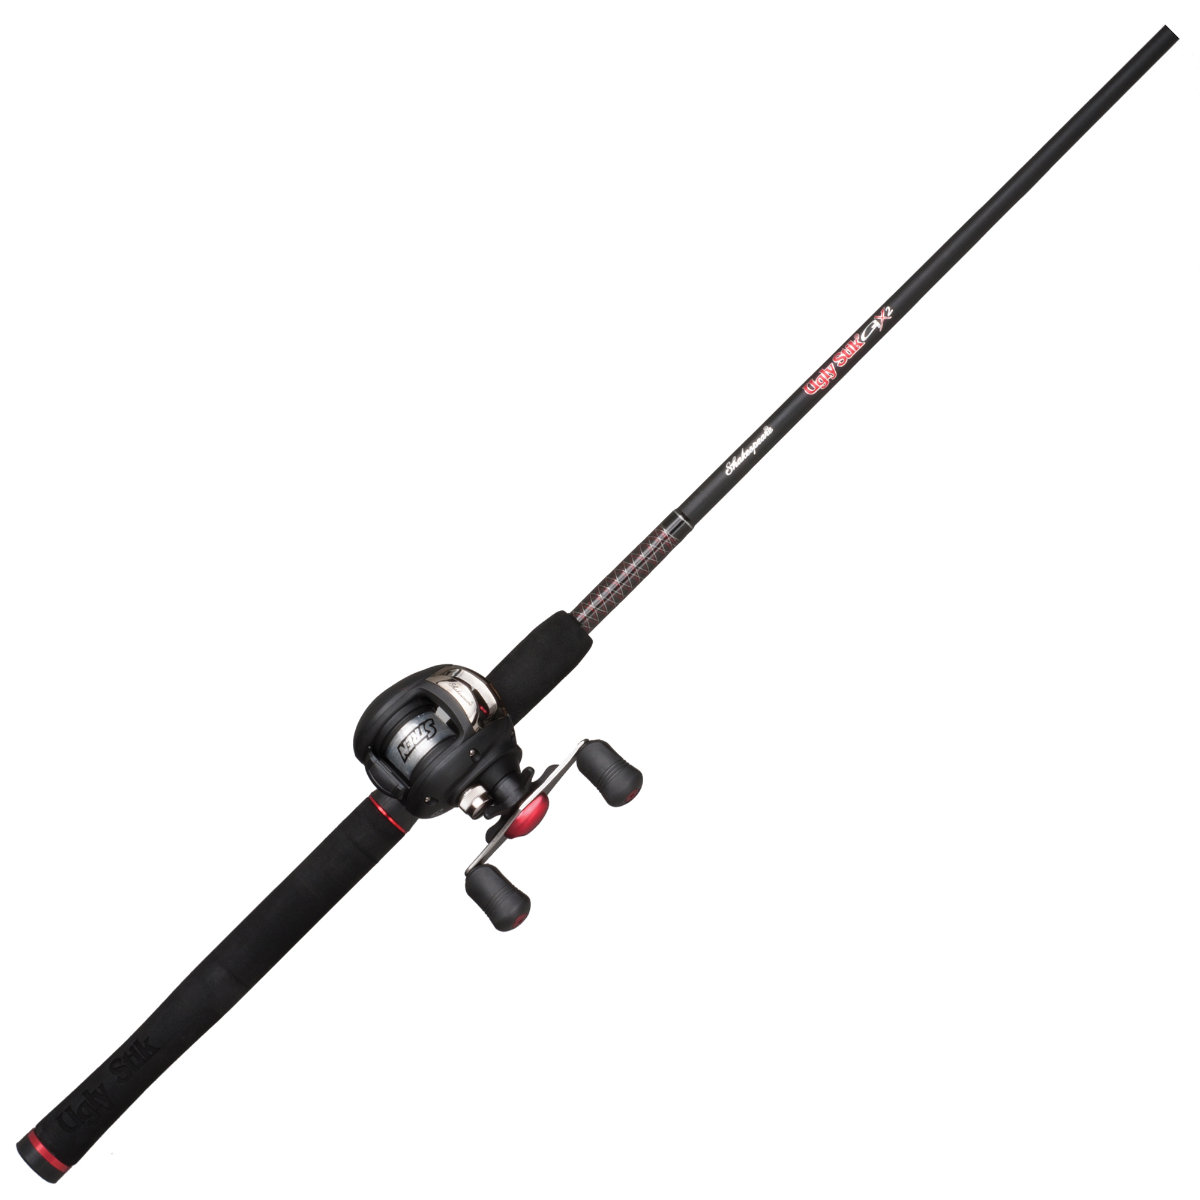 Ugly Stik 4'8” GX2 Spinning Fishing Rod and Reel Spinning Combo, Ugly Tech  Construction with Clear Tip Design, 4'8” 1-Piece Rod, BLK, 20 Size Reel -  4'8 - Ultra Light - 1pc